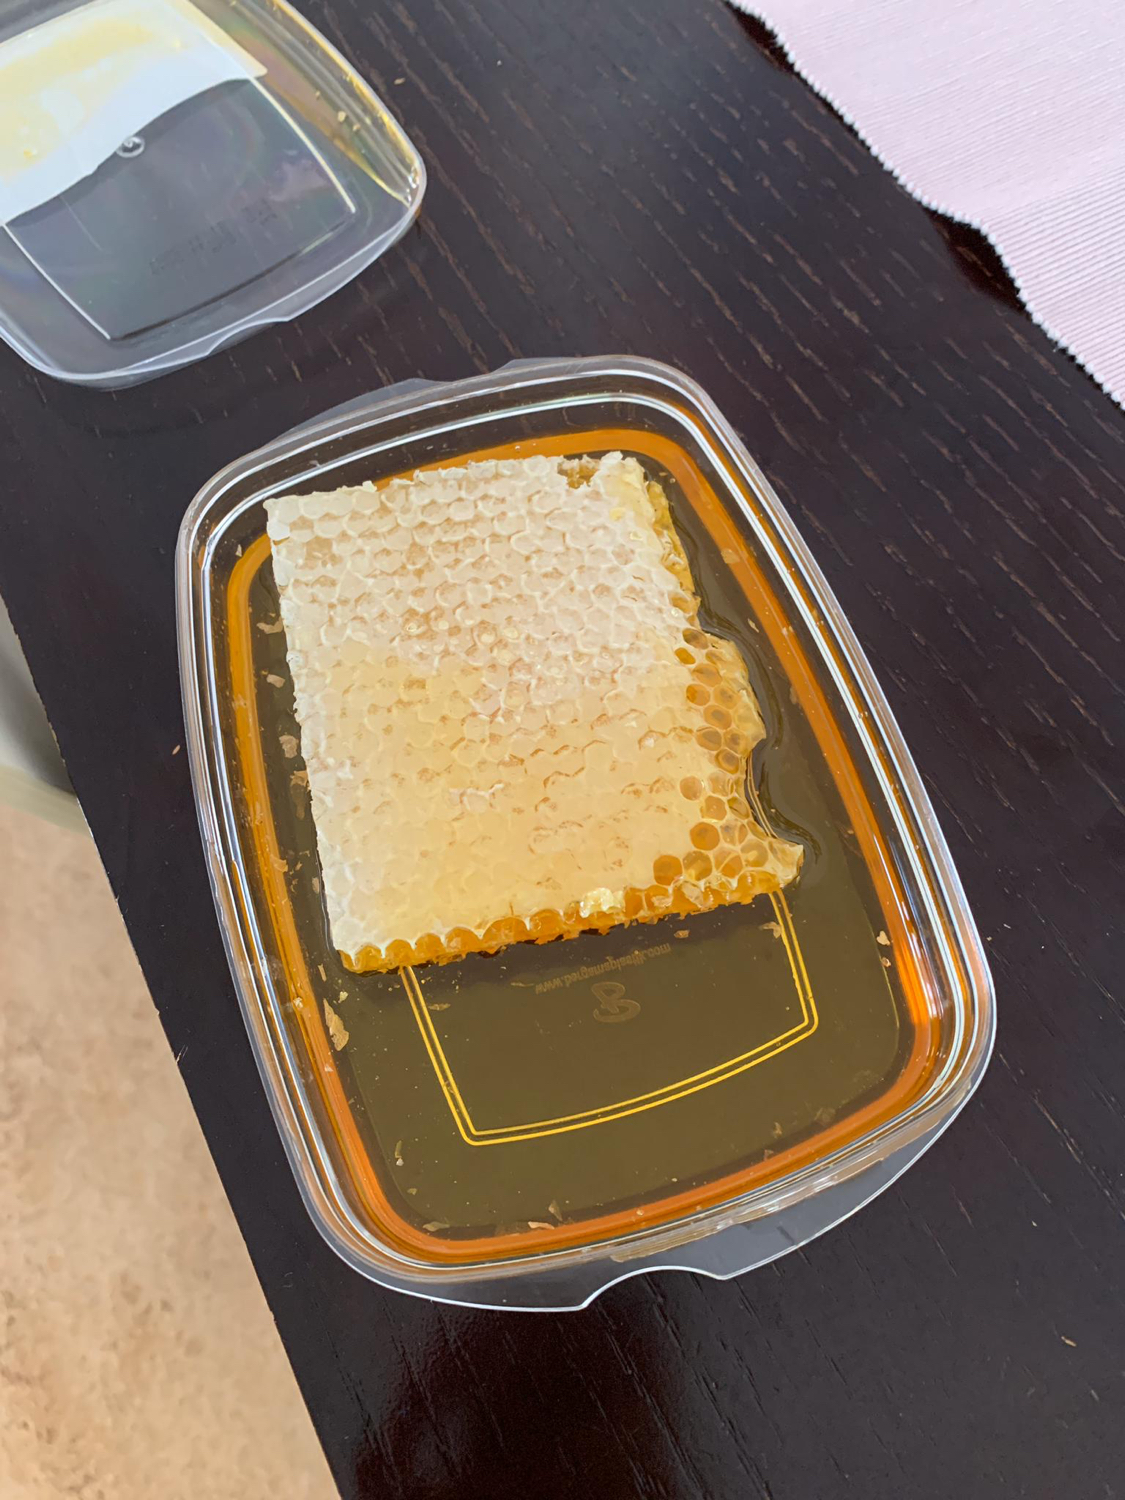 Looking for advice from expert beekeepers and honey lovers - My, Honey, Beekeeping, Beekeeper, Cooking, Honeycomb, Need advice, Advice, Bees